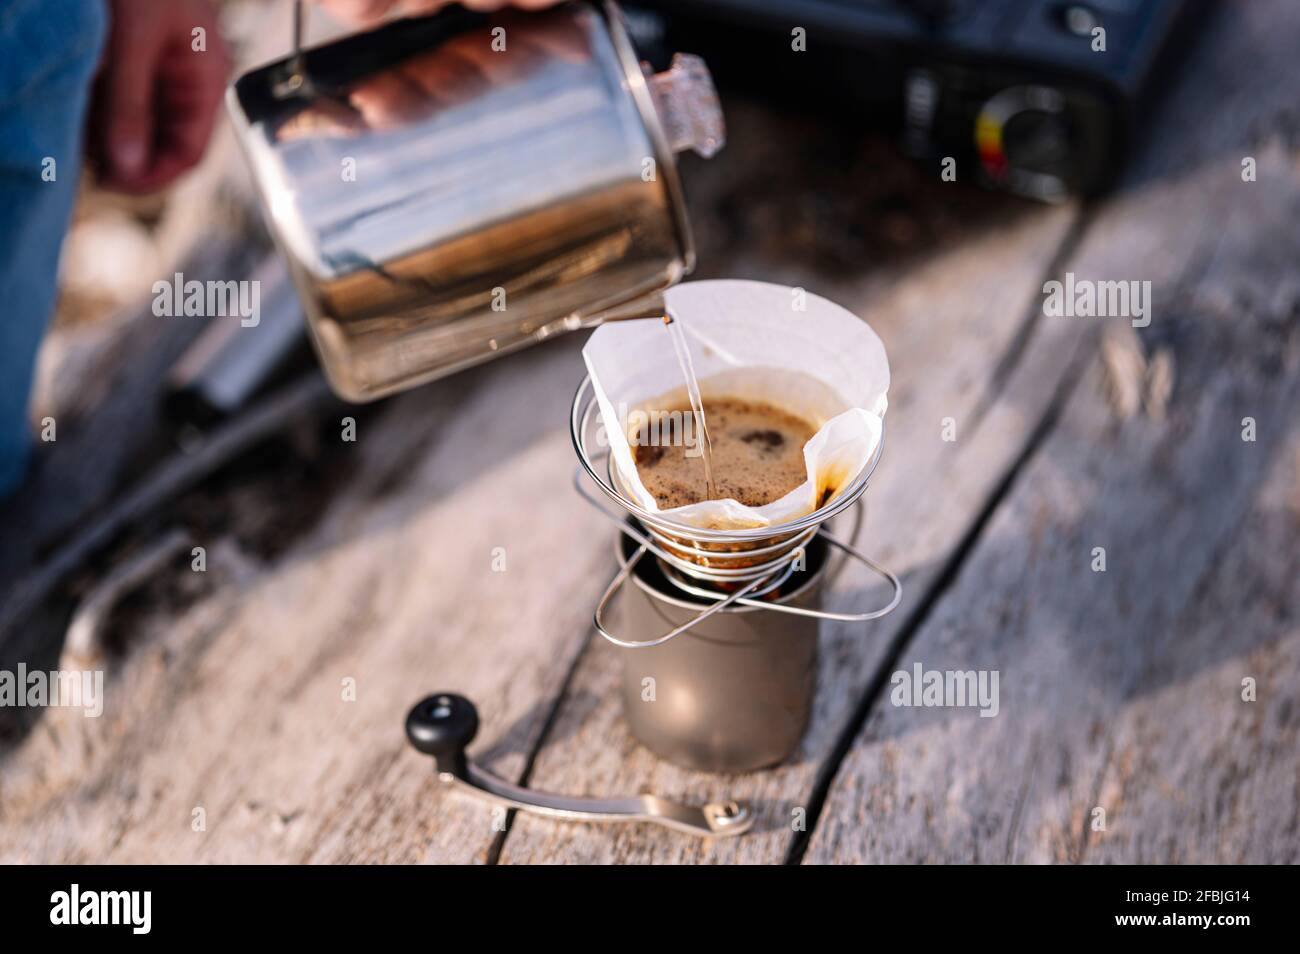 Man pouring water through kettle while preparing coffee Stock Photo